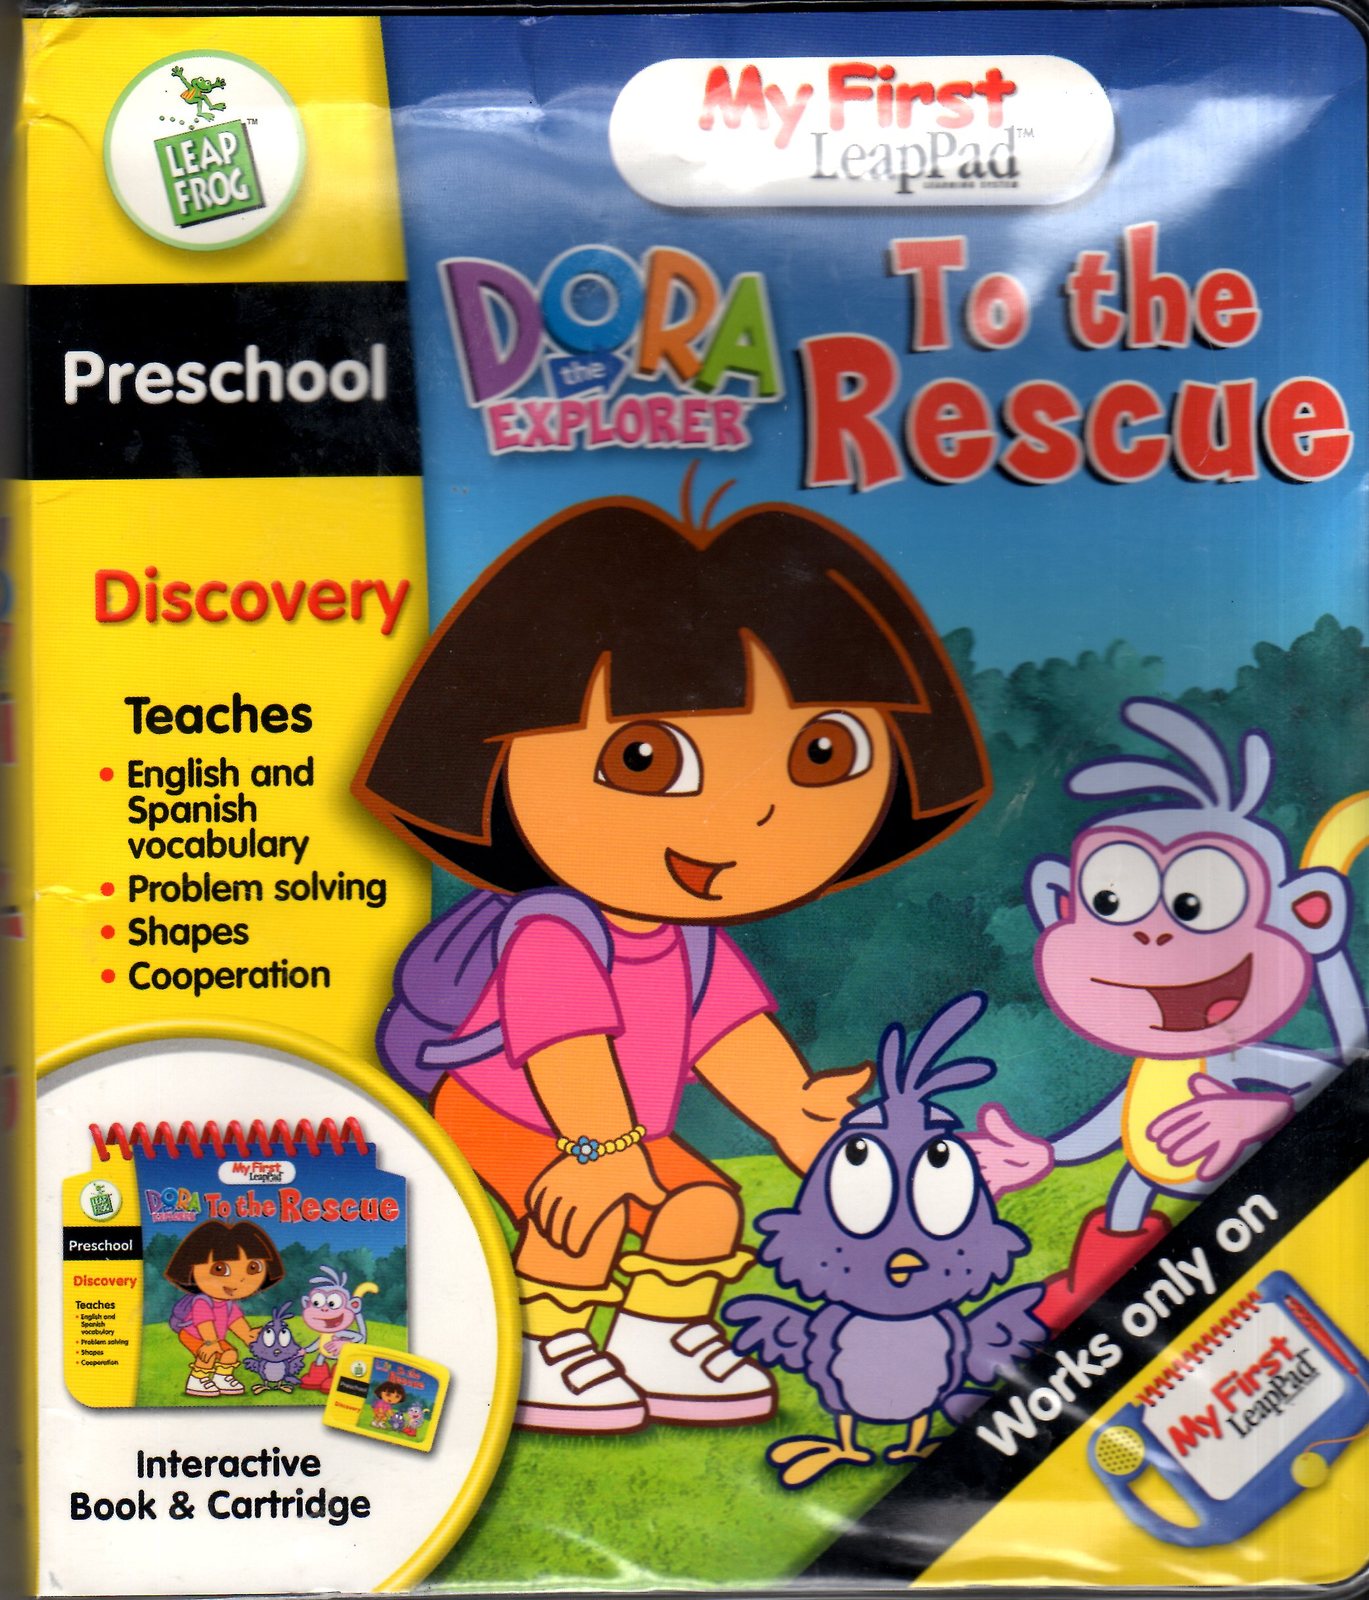 LeapFrog - My First LeapPad -Dora The Explorer To The Rescue - Game ...